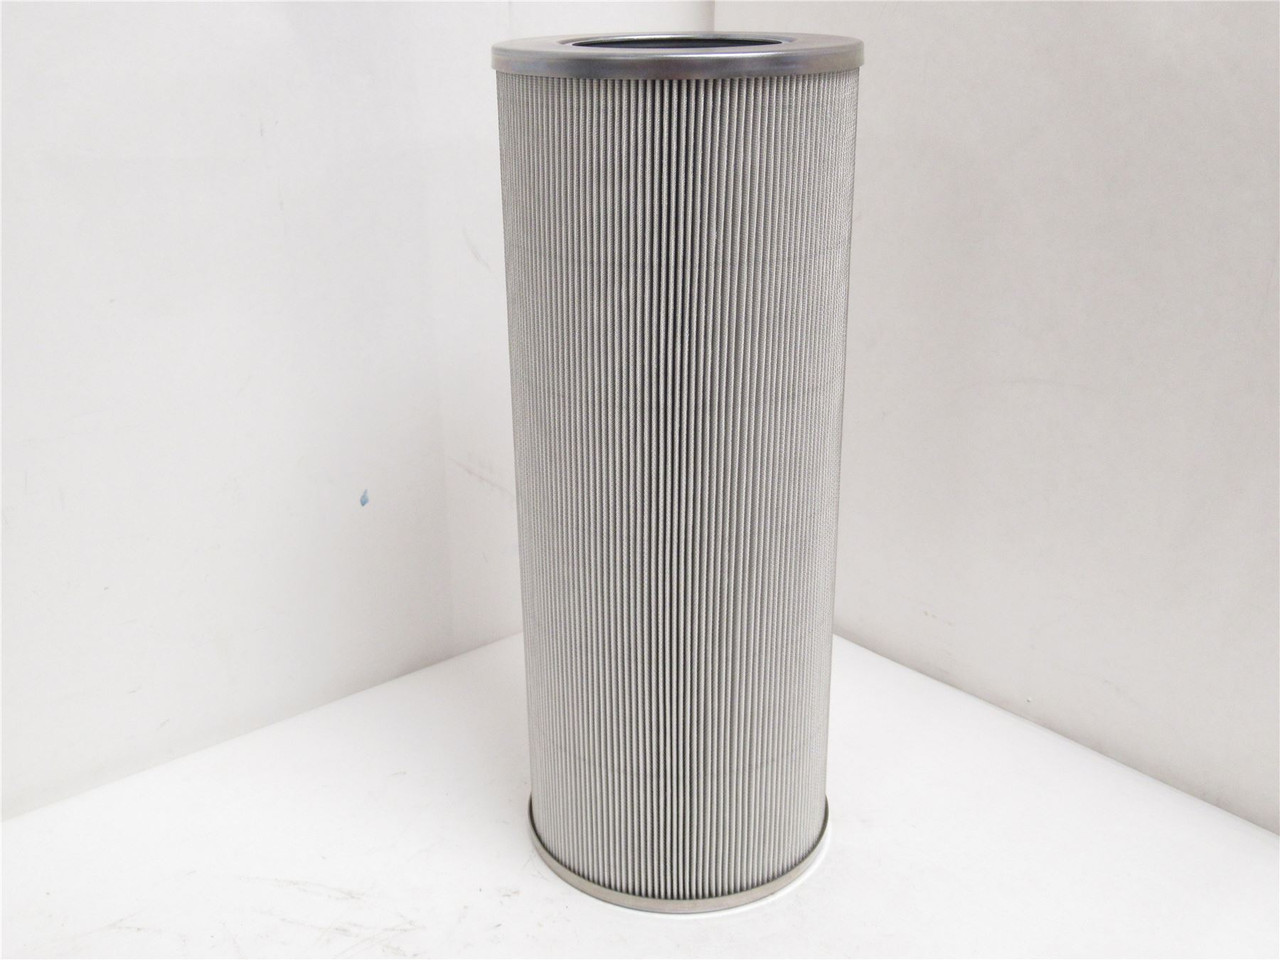 Mahle PI 22100 RN SMX 6; Low Pressure Filter 3-1/2"ID